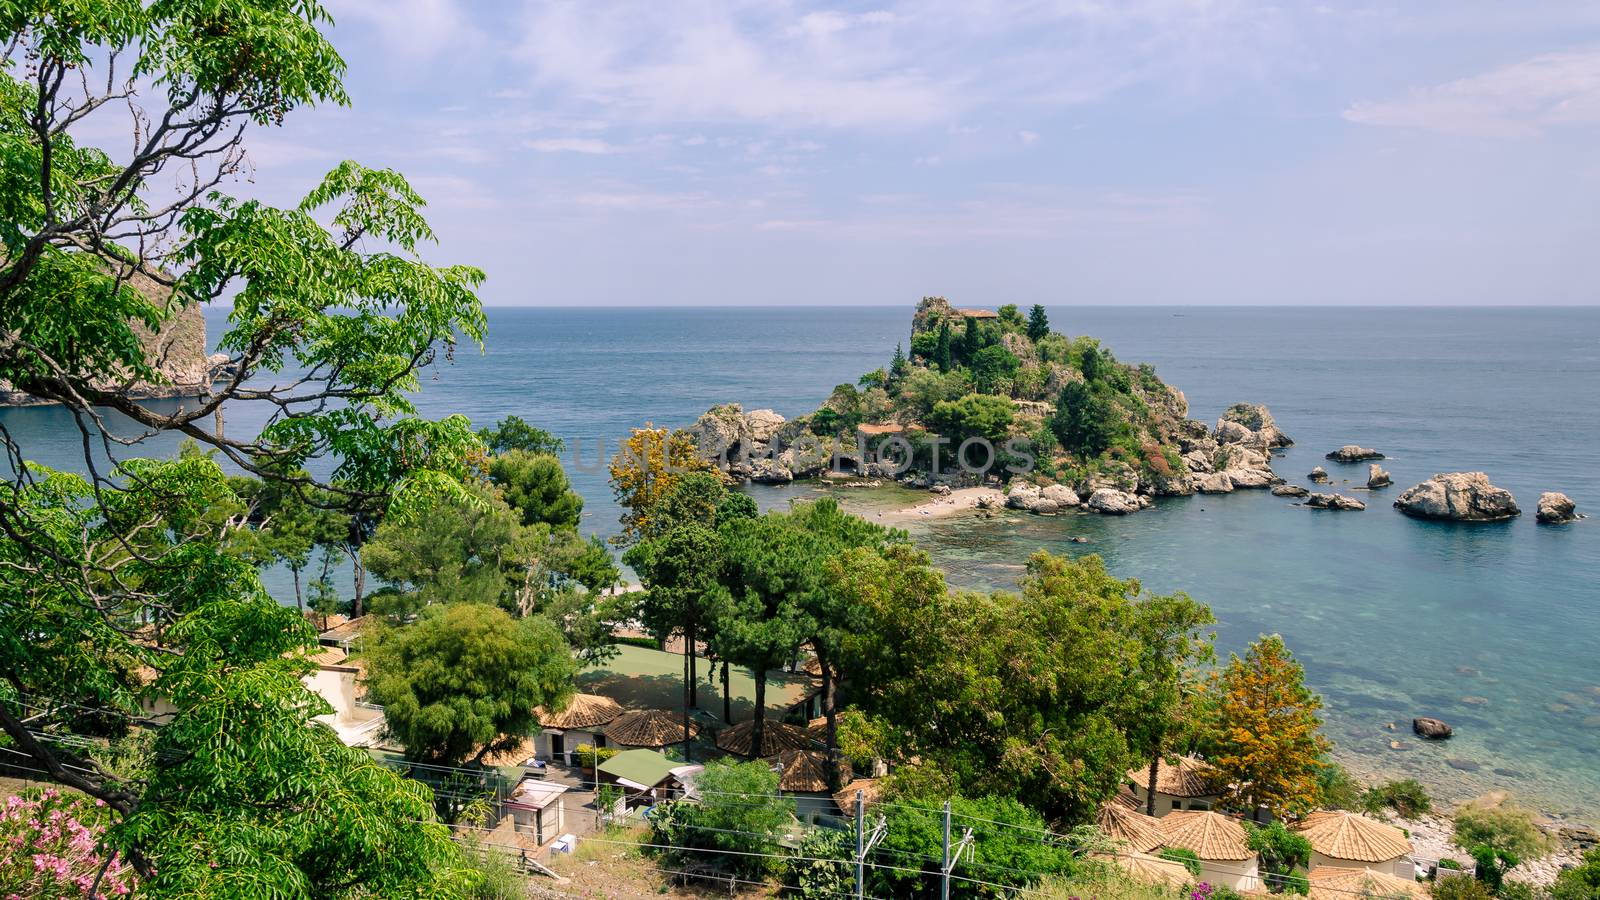 Italy: View of Isola Bella's island by alanstix64